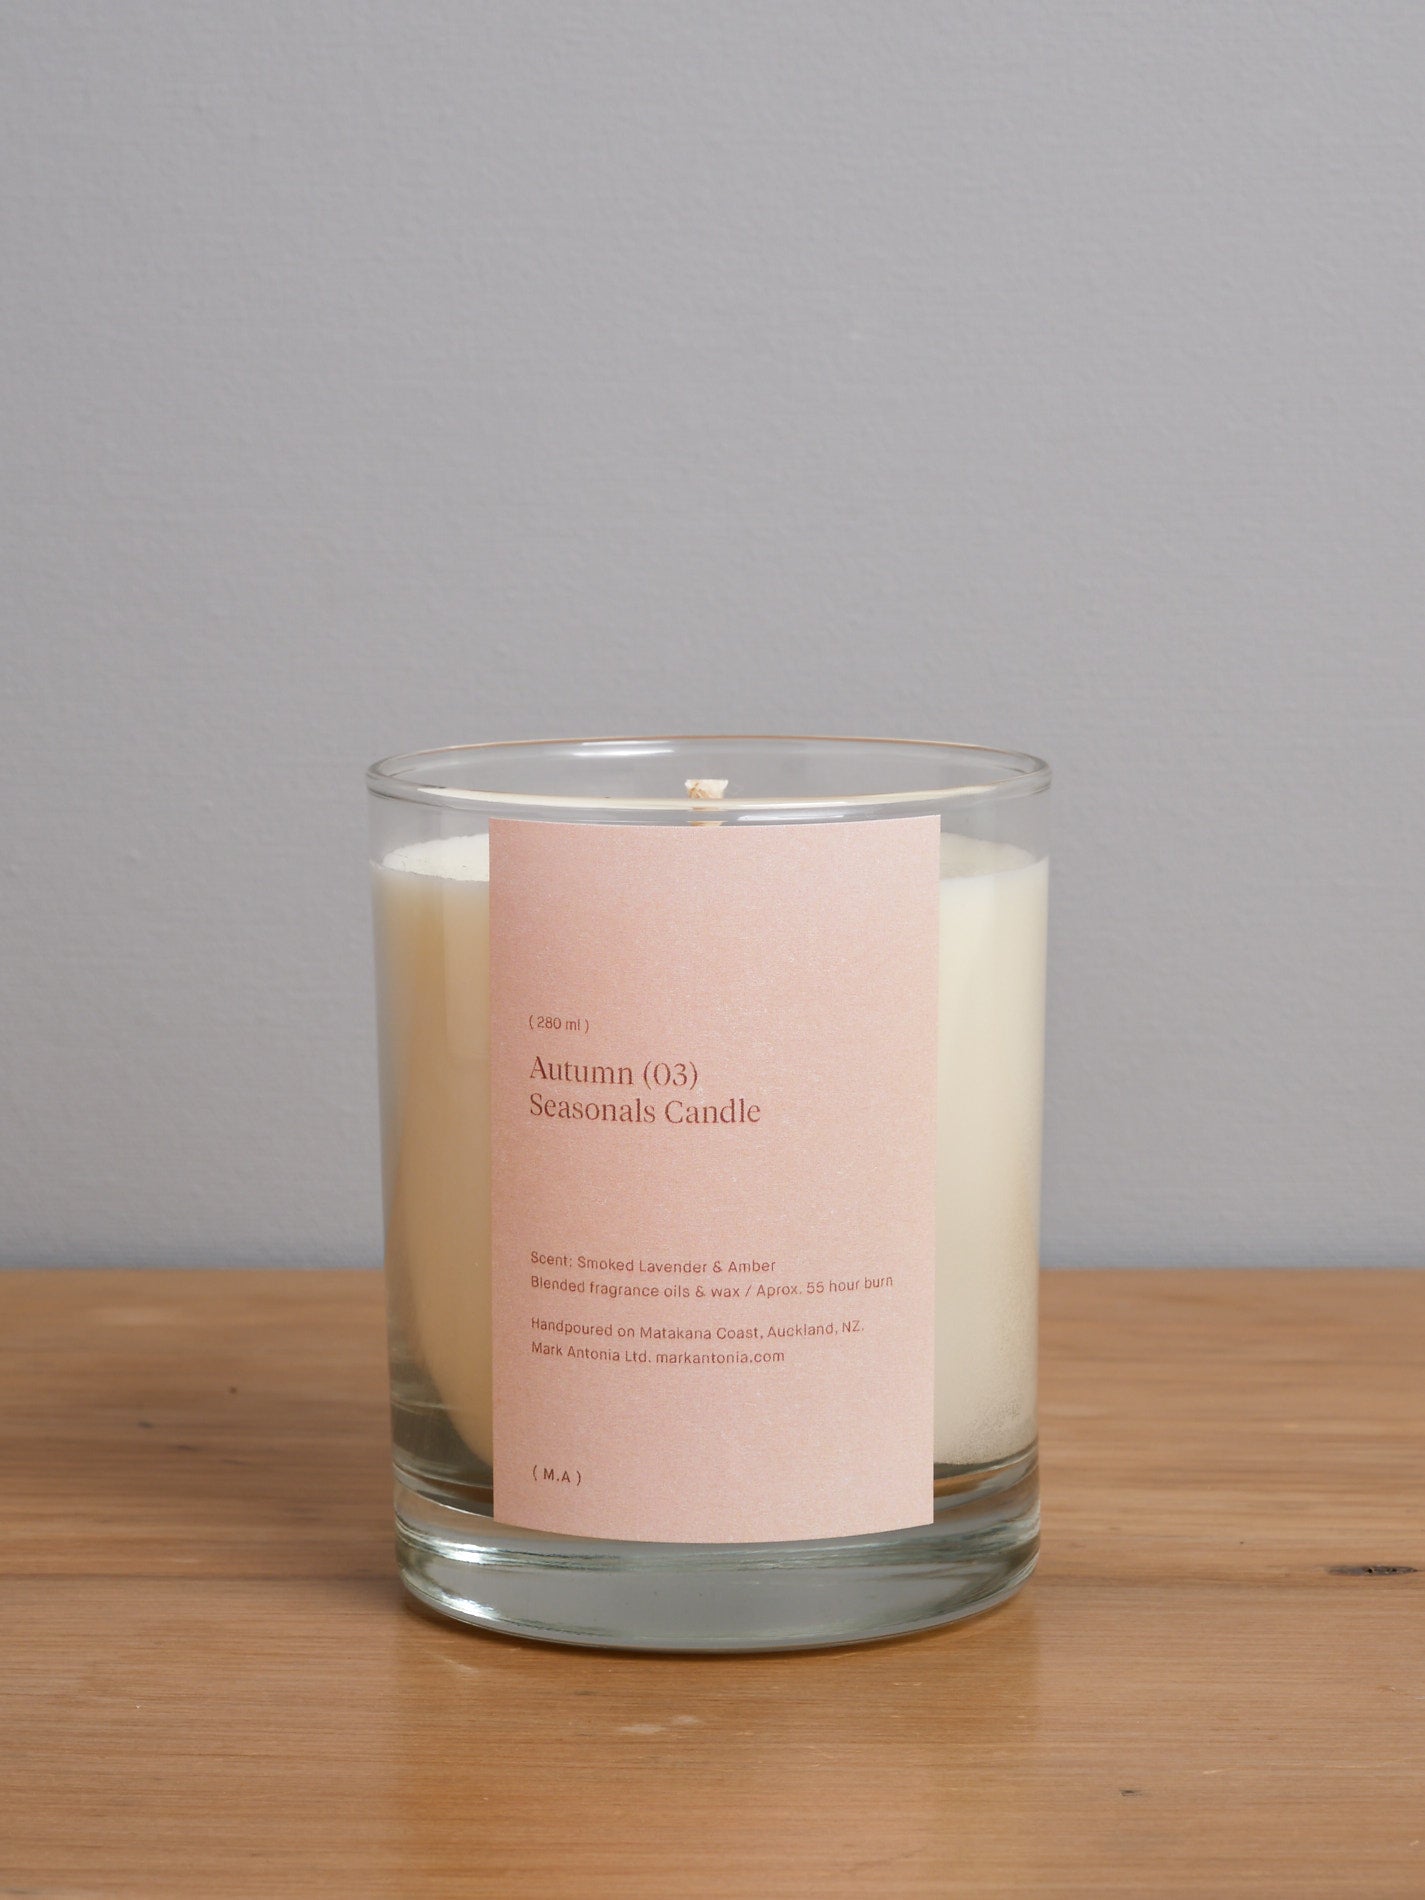 A Mark Antonia Seasonal Candle (2.0) – Autumn with a pink label sitting on a wooden table.